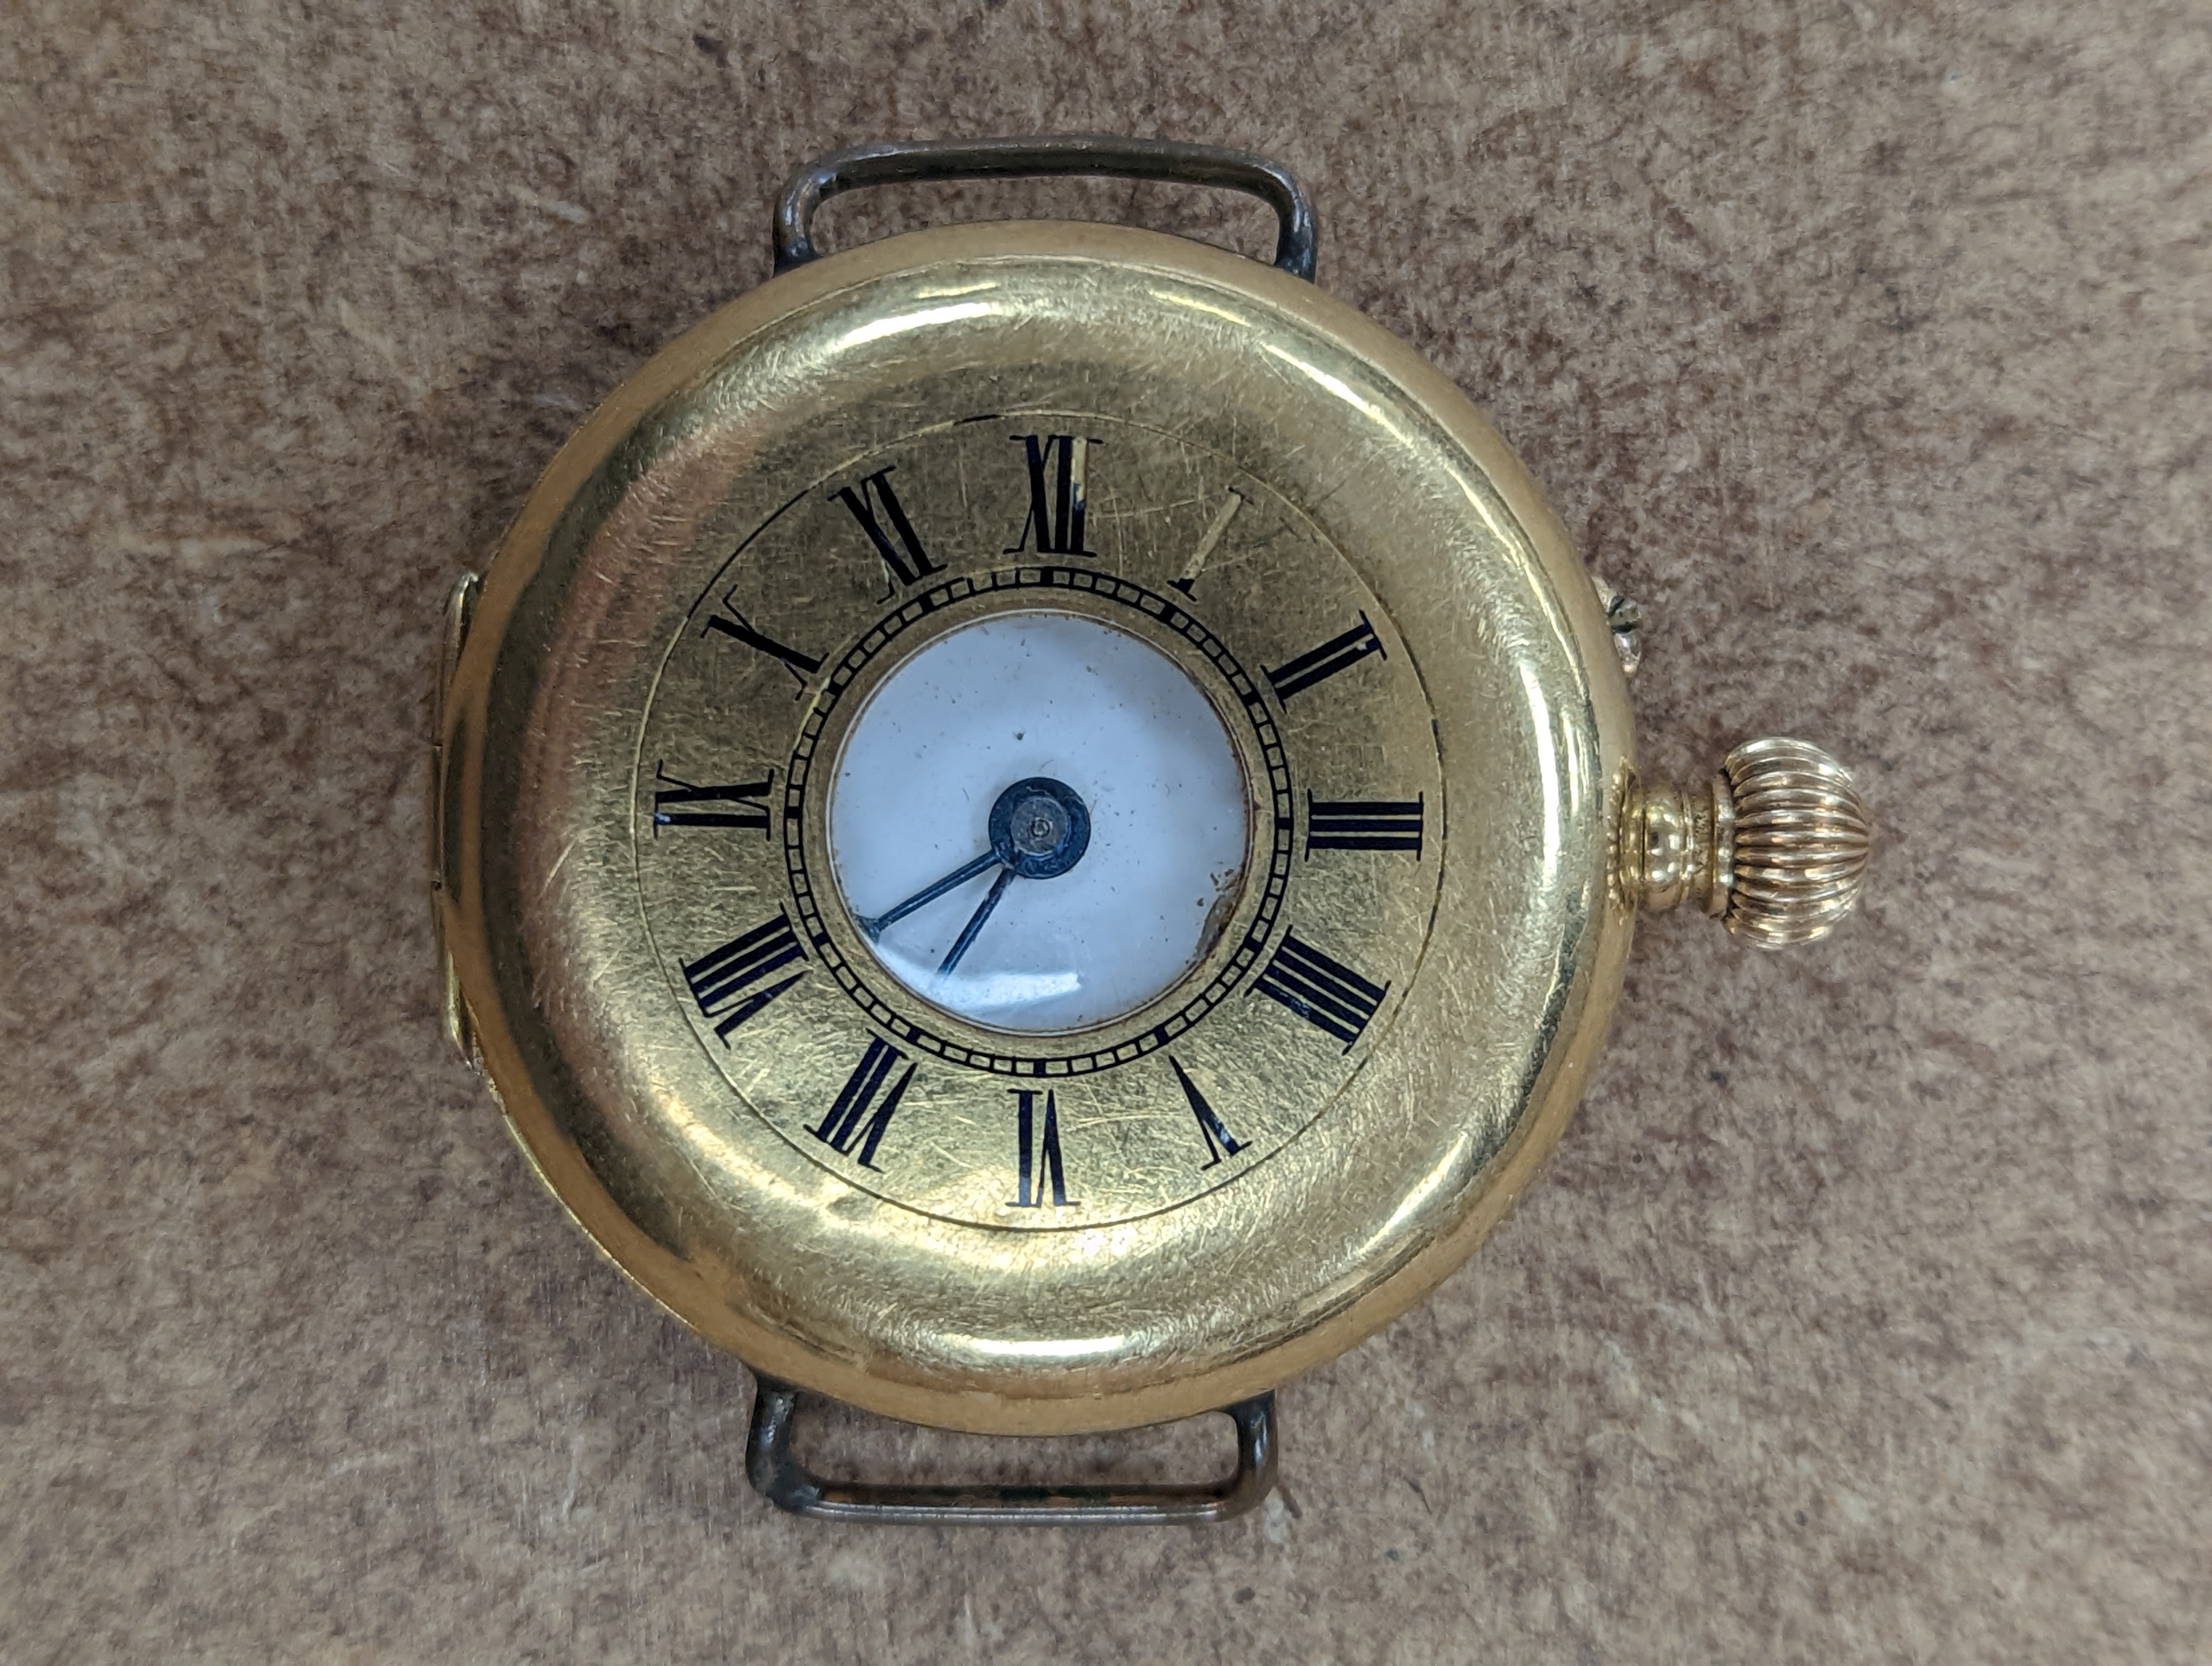 A gentleman's early 20th century continental 18k half hunter wrist watch, case diameter 33mm, gross weight 32.7 grams, together with two other silver watches.